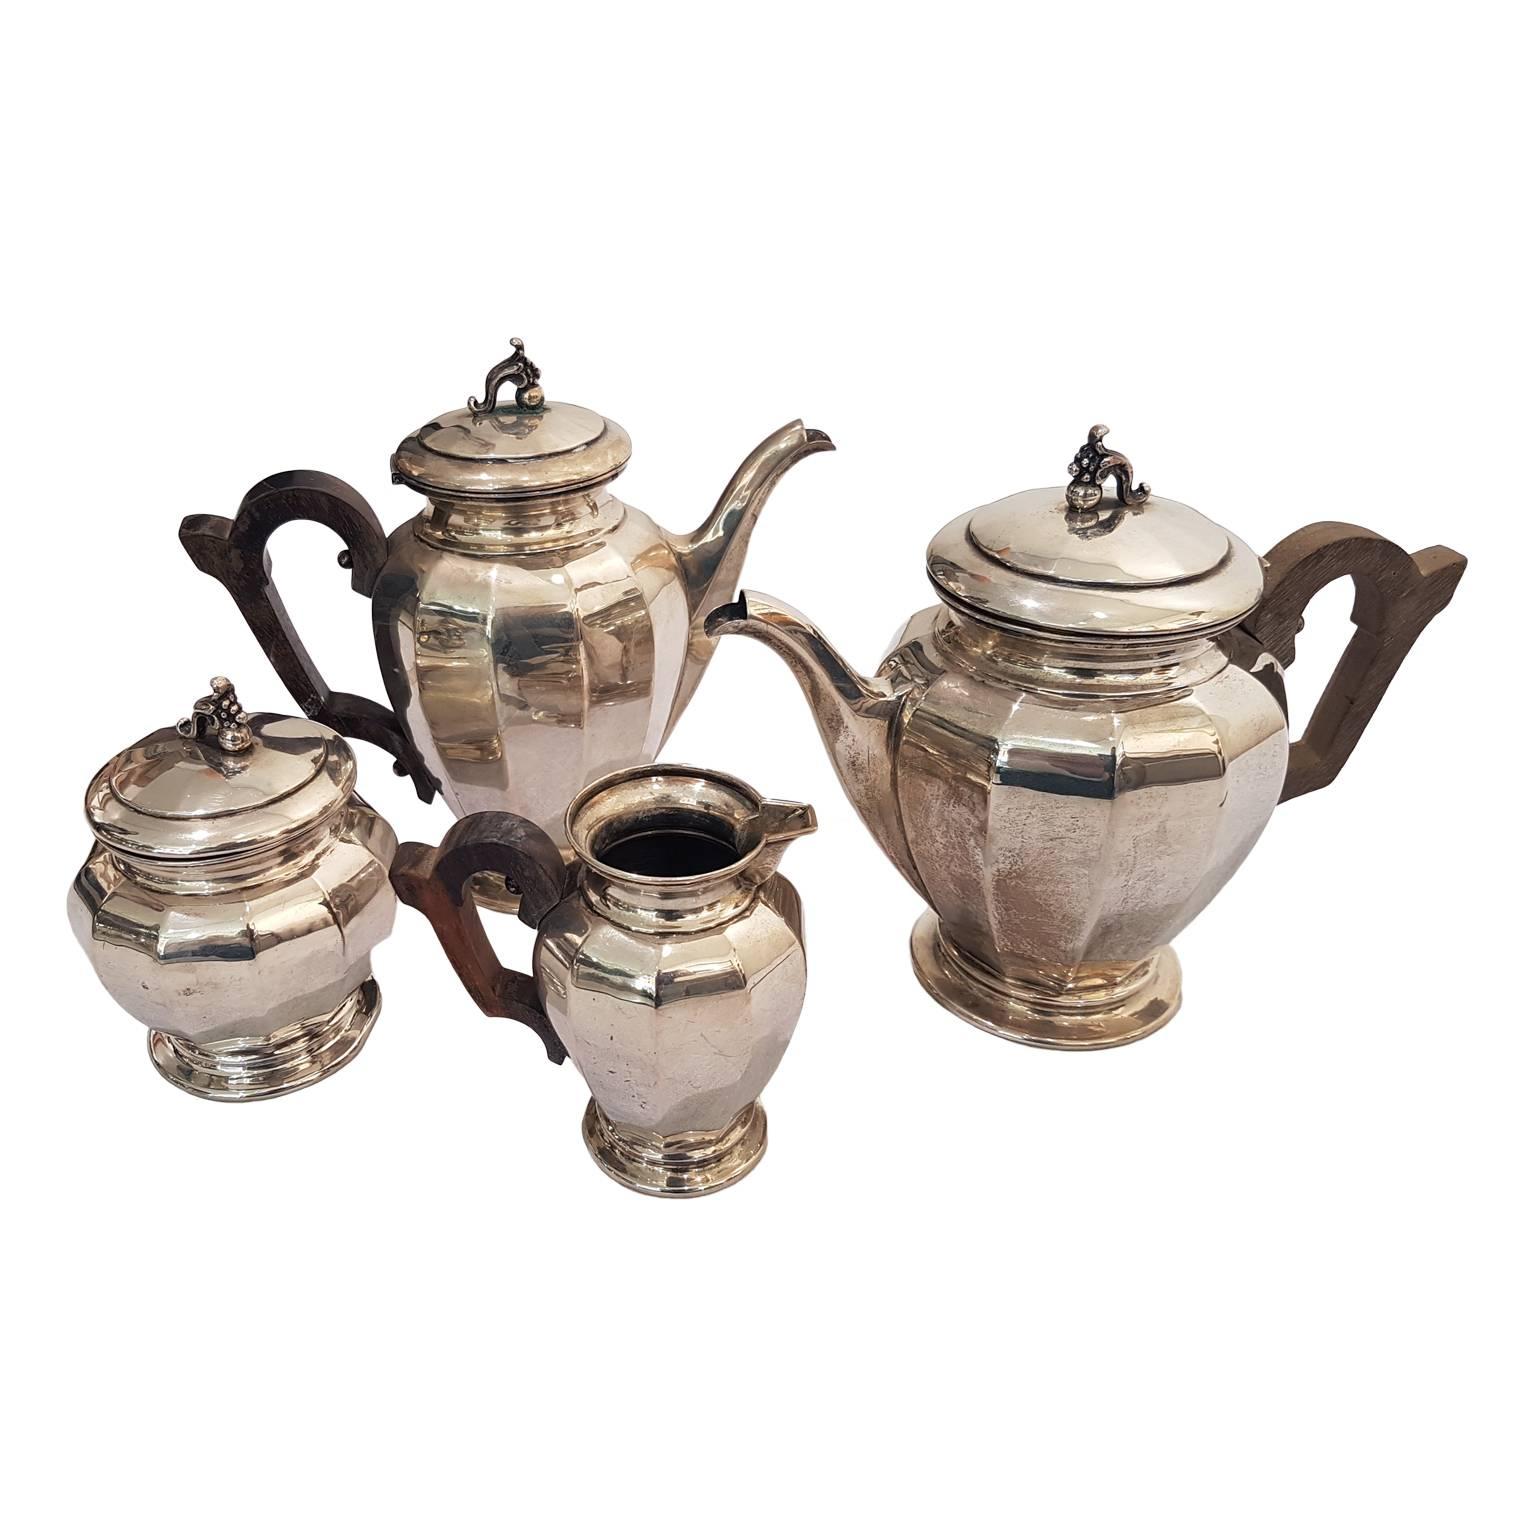 Set composed by teapot, coffee pot, milk jug and sugar bowl with wooden handle and hinged lids with cornucopia knobs.

Produced by Bolli, Milan, by the famous silversmith Enrico Messulam.

Measures: Teapot: 20 x 12 x 23 cm
Coffeepot: 21 x 11 x 22